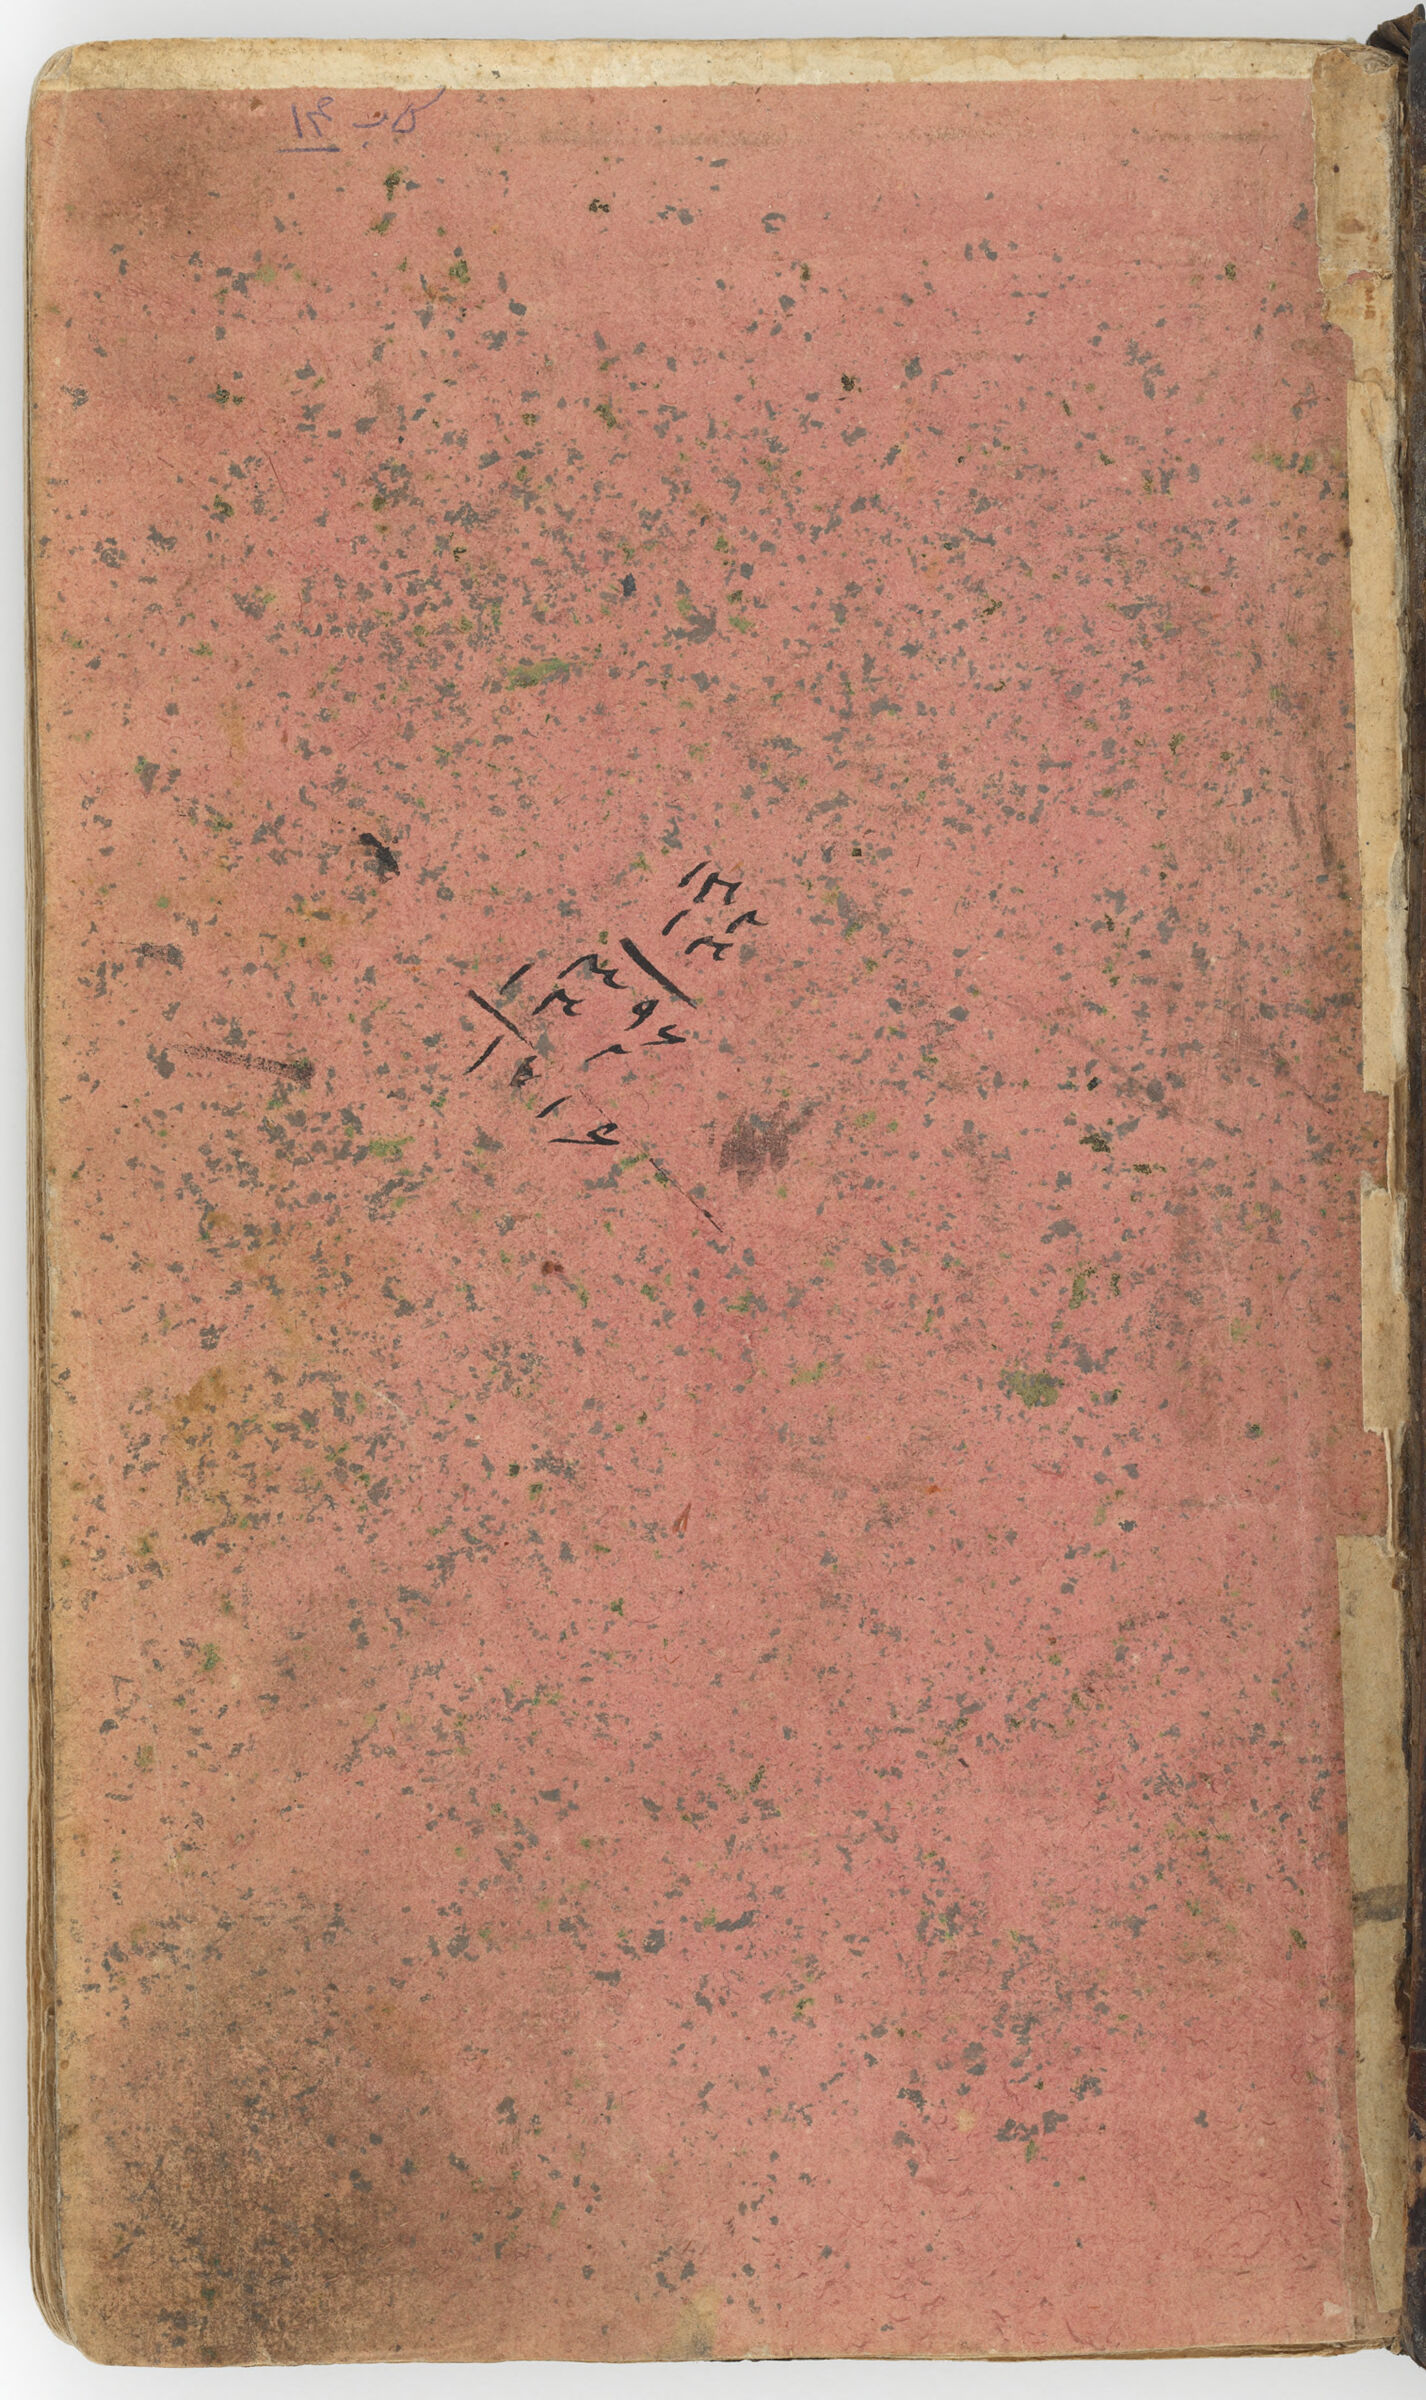 Gold-Speckled Pinkish Paper Of Flyleaf (Almost Blank Recto; Scribbled Lines Verso Of Folio 1), From A Manuscript Of Layla And Majnun By Jami